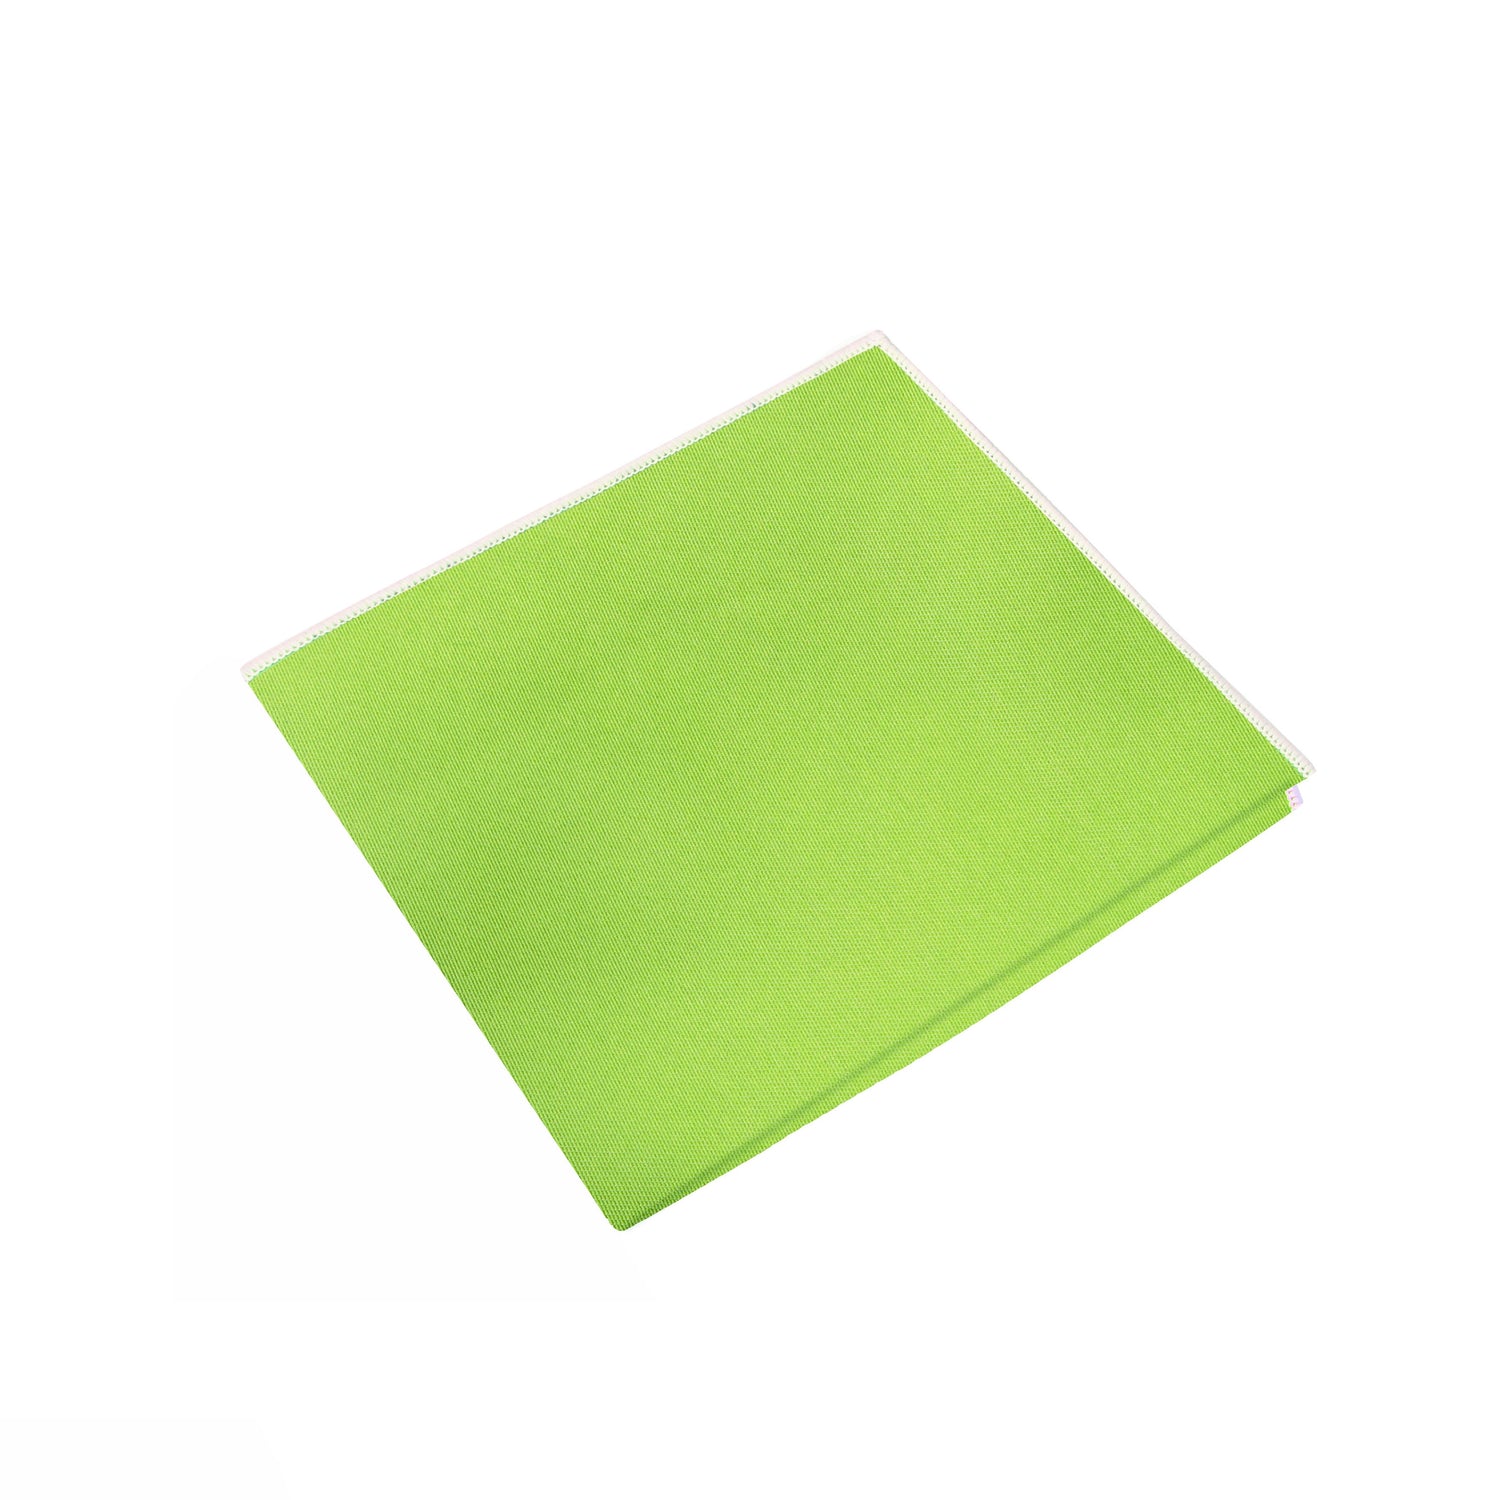 Lime Green with White Edges Pocket Square